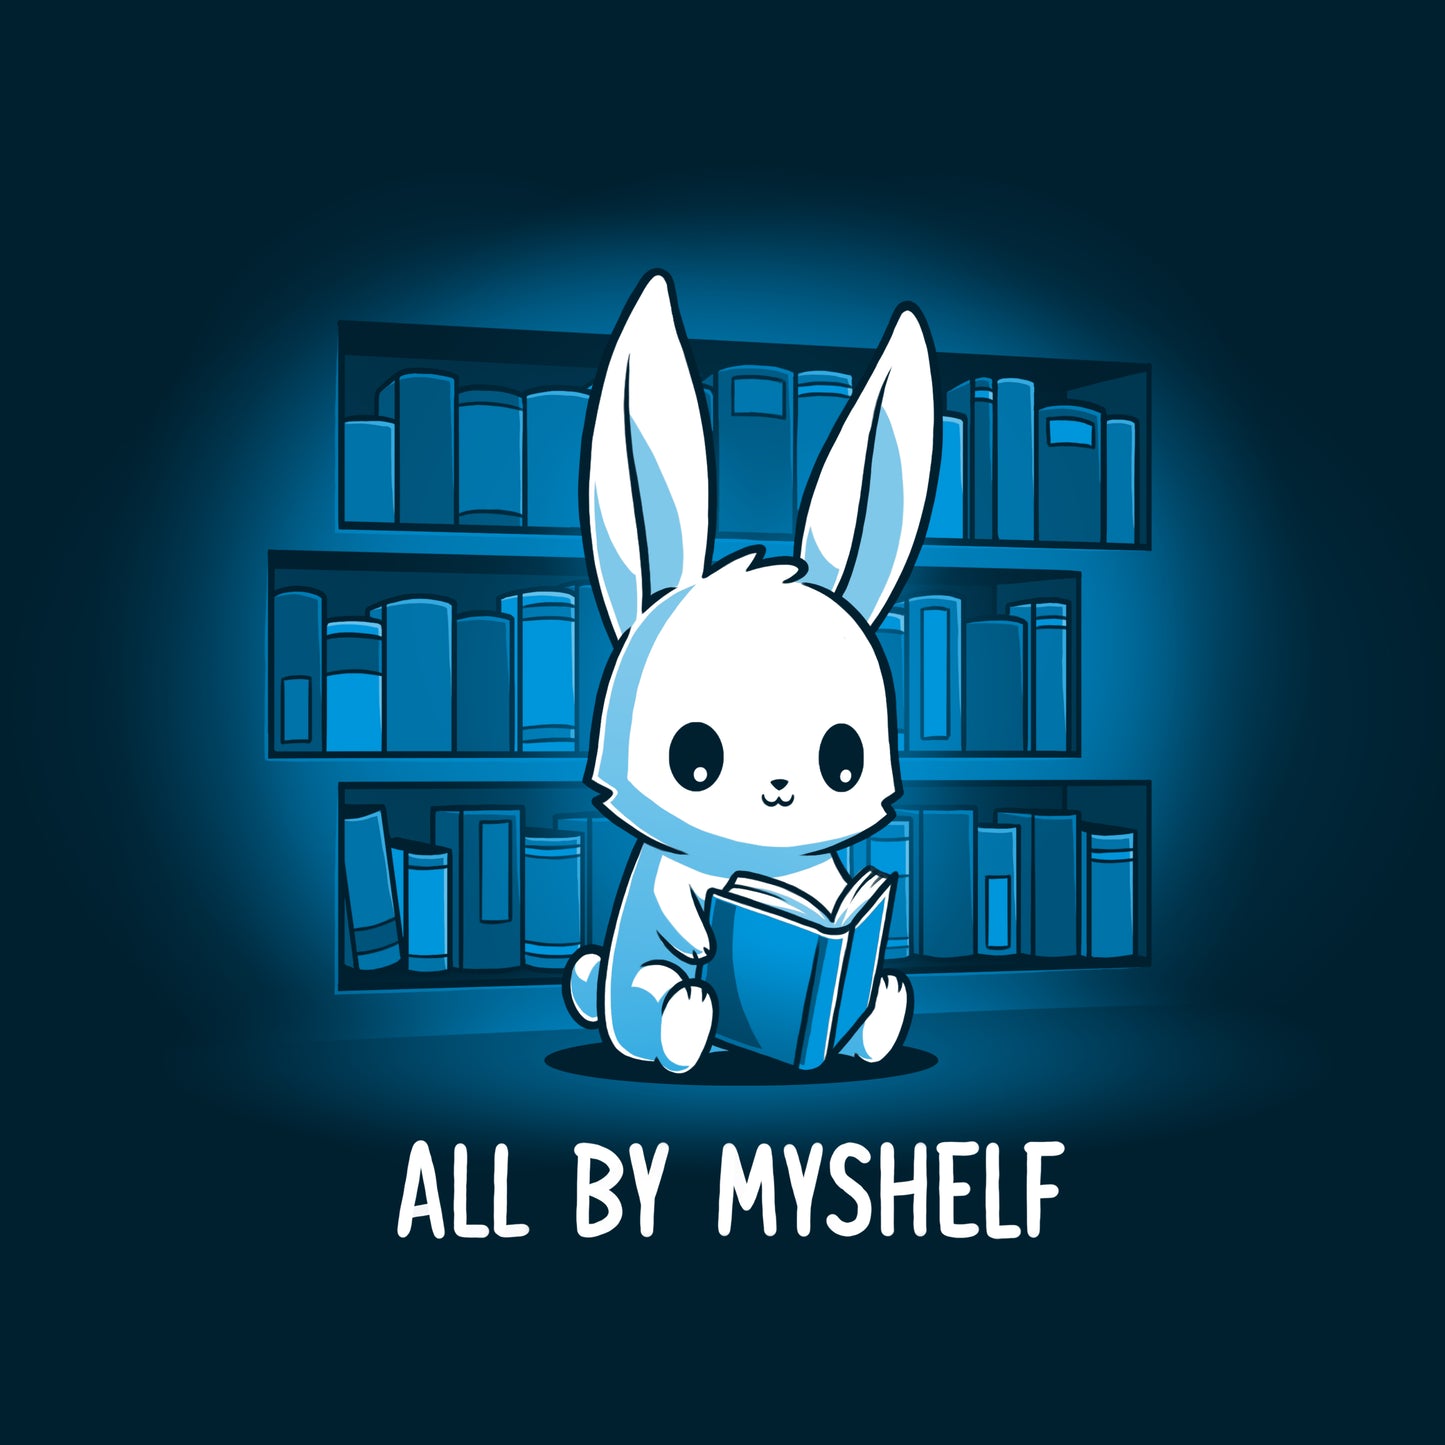 Keywords: bunny, book
Product Name: All By MyShelf
Brand Name: TeeTurtle

Sentence replaced: I love reading my bunny a book from my All By MyShelf collection by TeeTurtle.